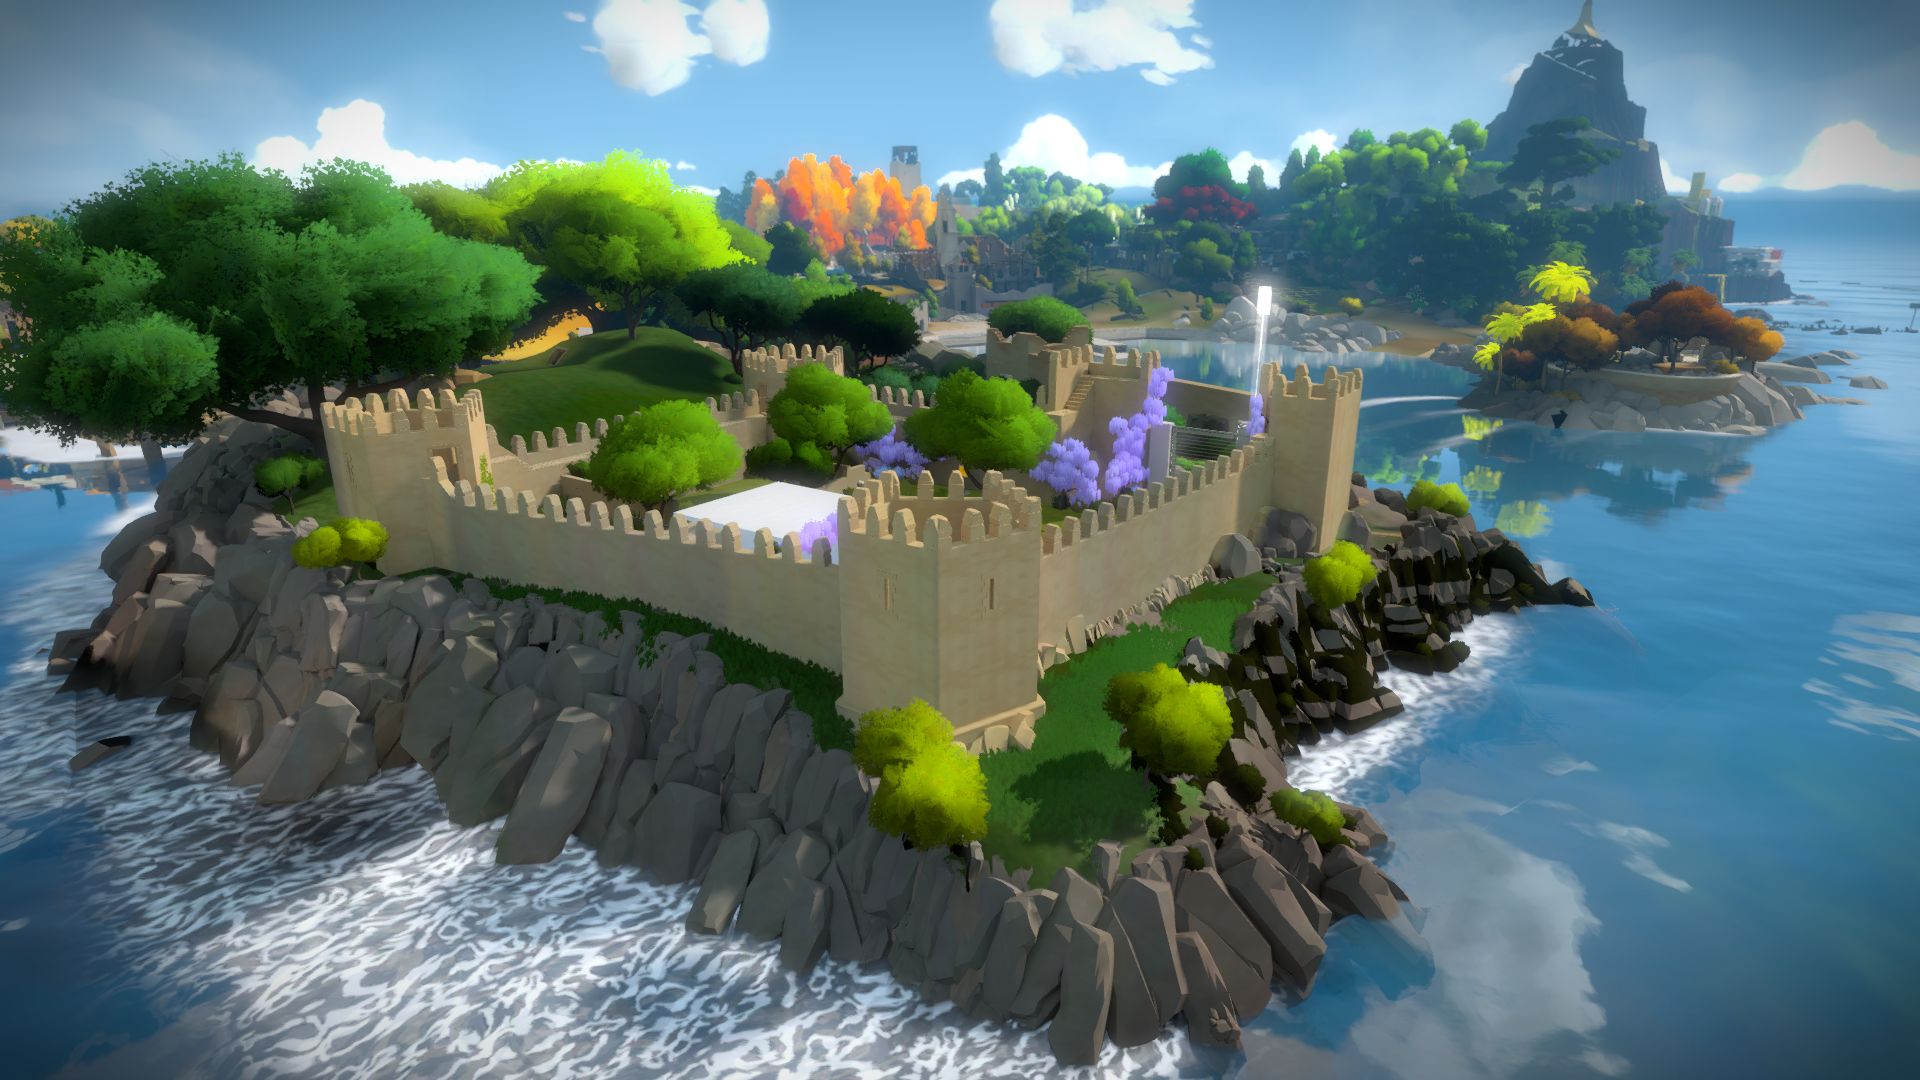 video game, the witness